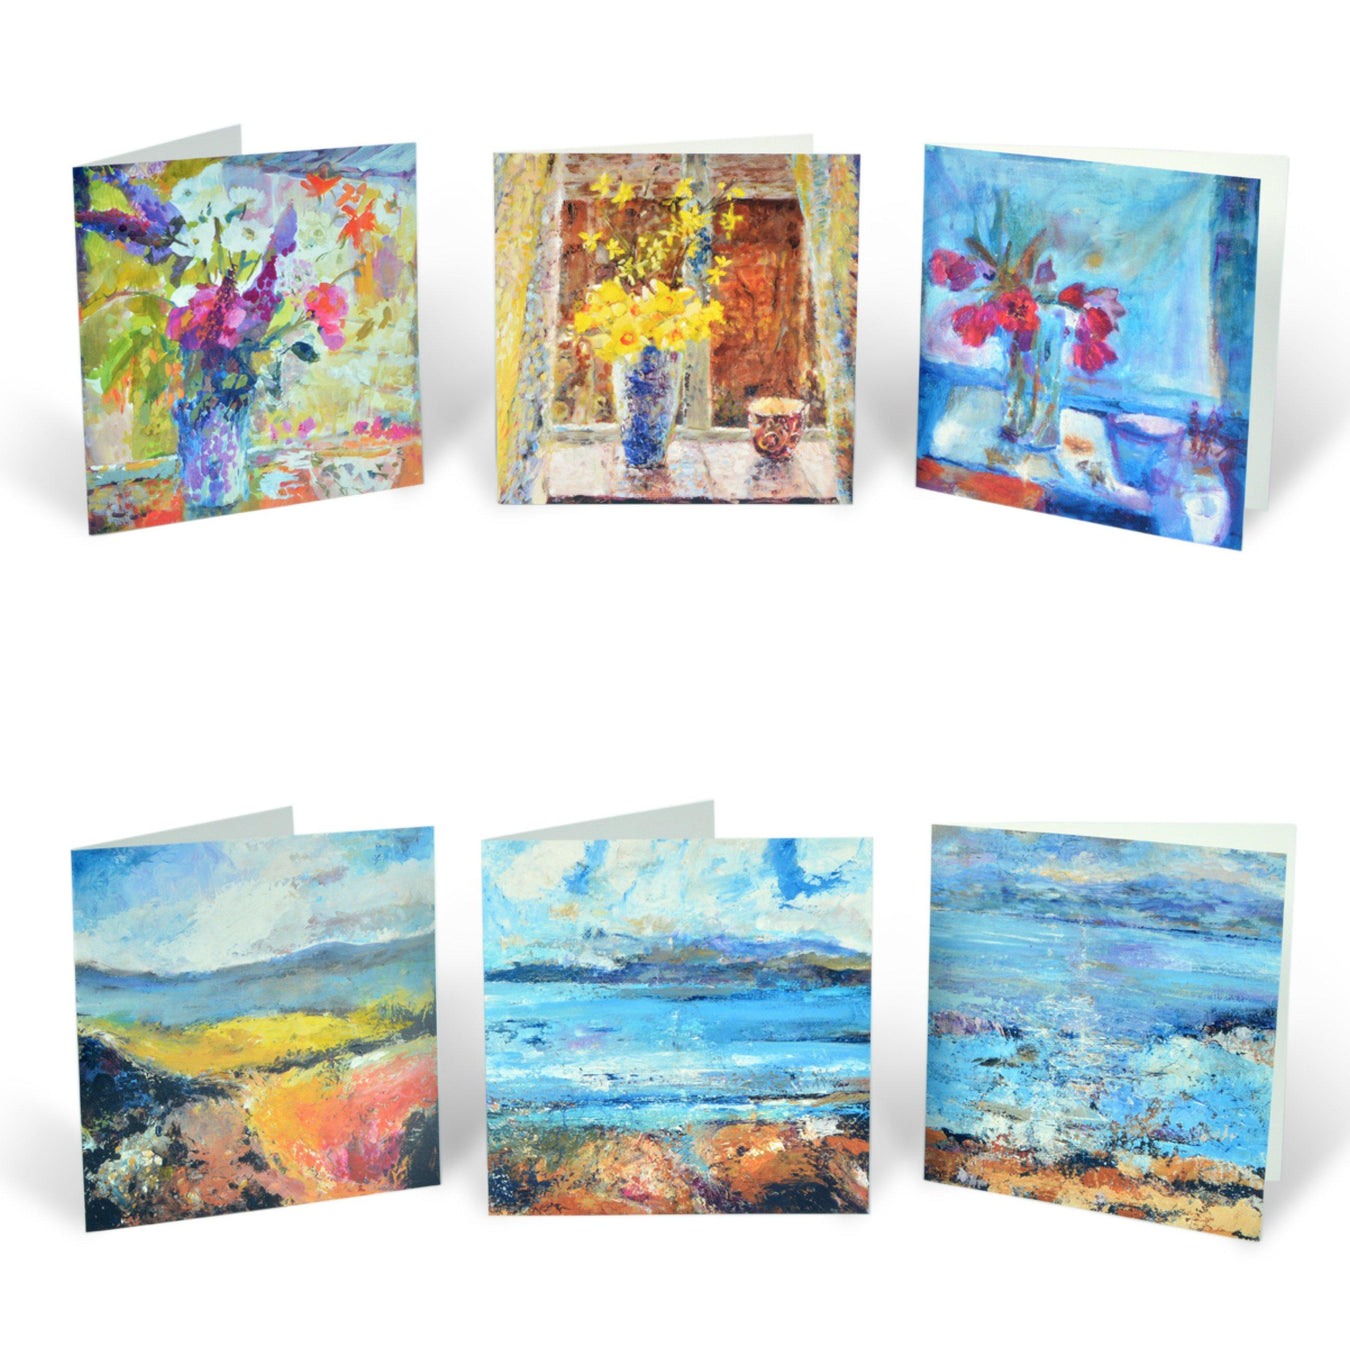 Original Art Greeting Cards. A set of Fine Art Greeting Cards. Three flower cards and three landscape cards all made from Original Art and Paintings by Judi Glover Art. Available as a set of 6 cards.